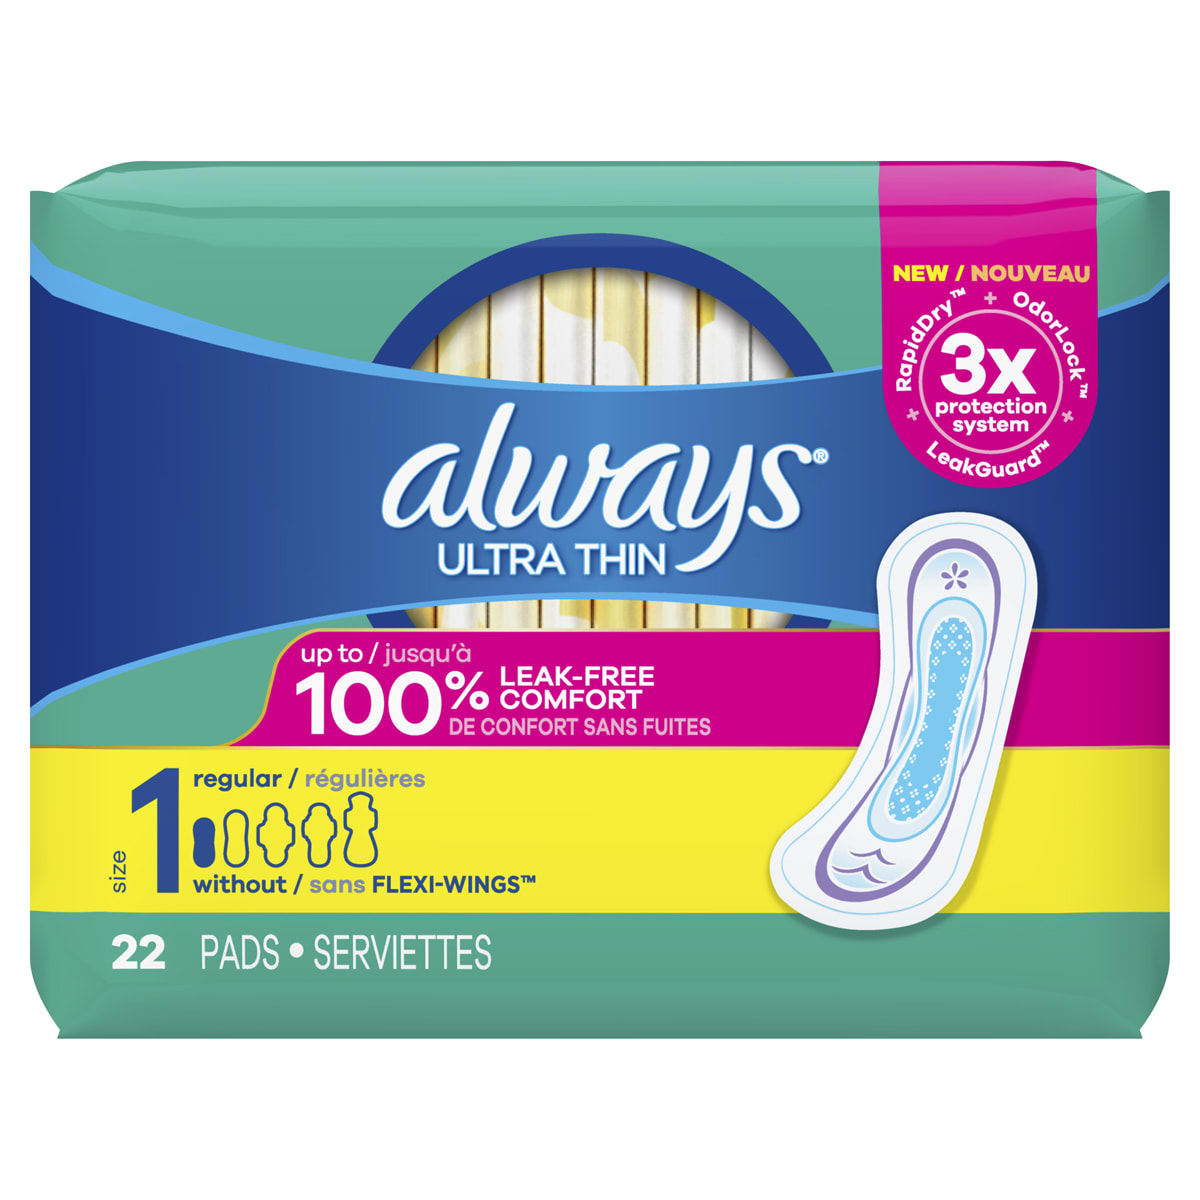 Maxi Pads - Shop for Feminine Hygiene Products Online